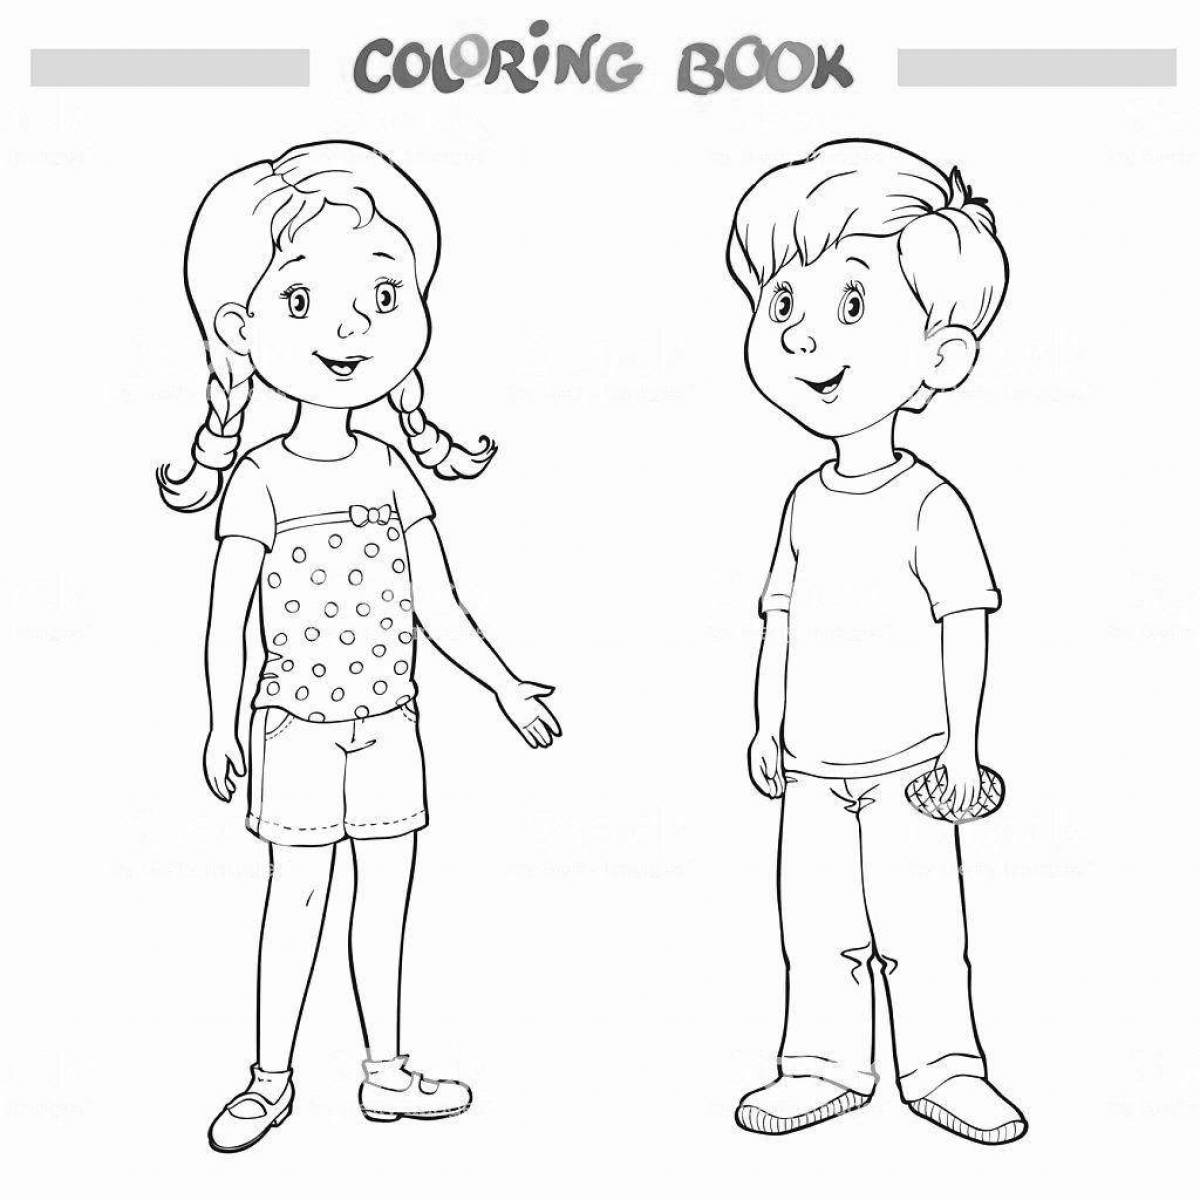 Gentle boy and girl holding hands coloring book